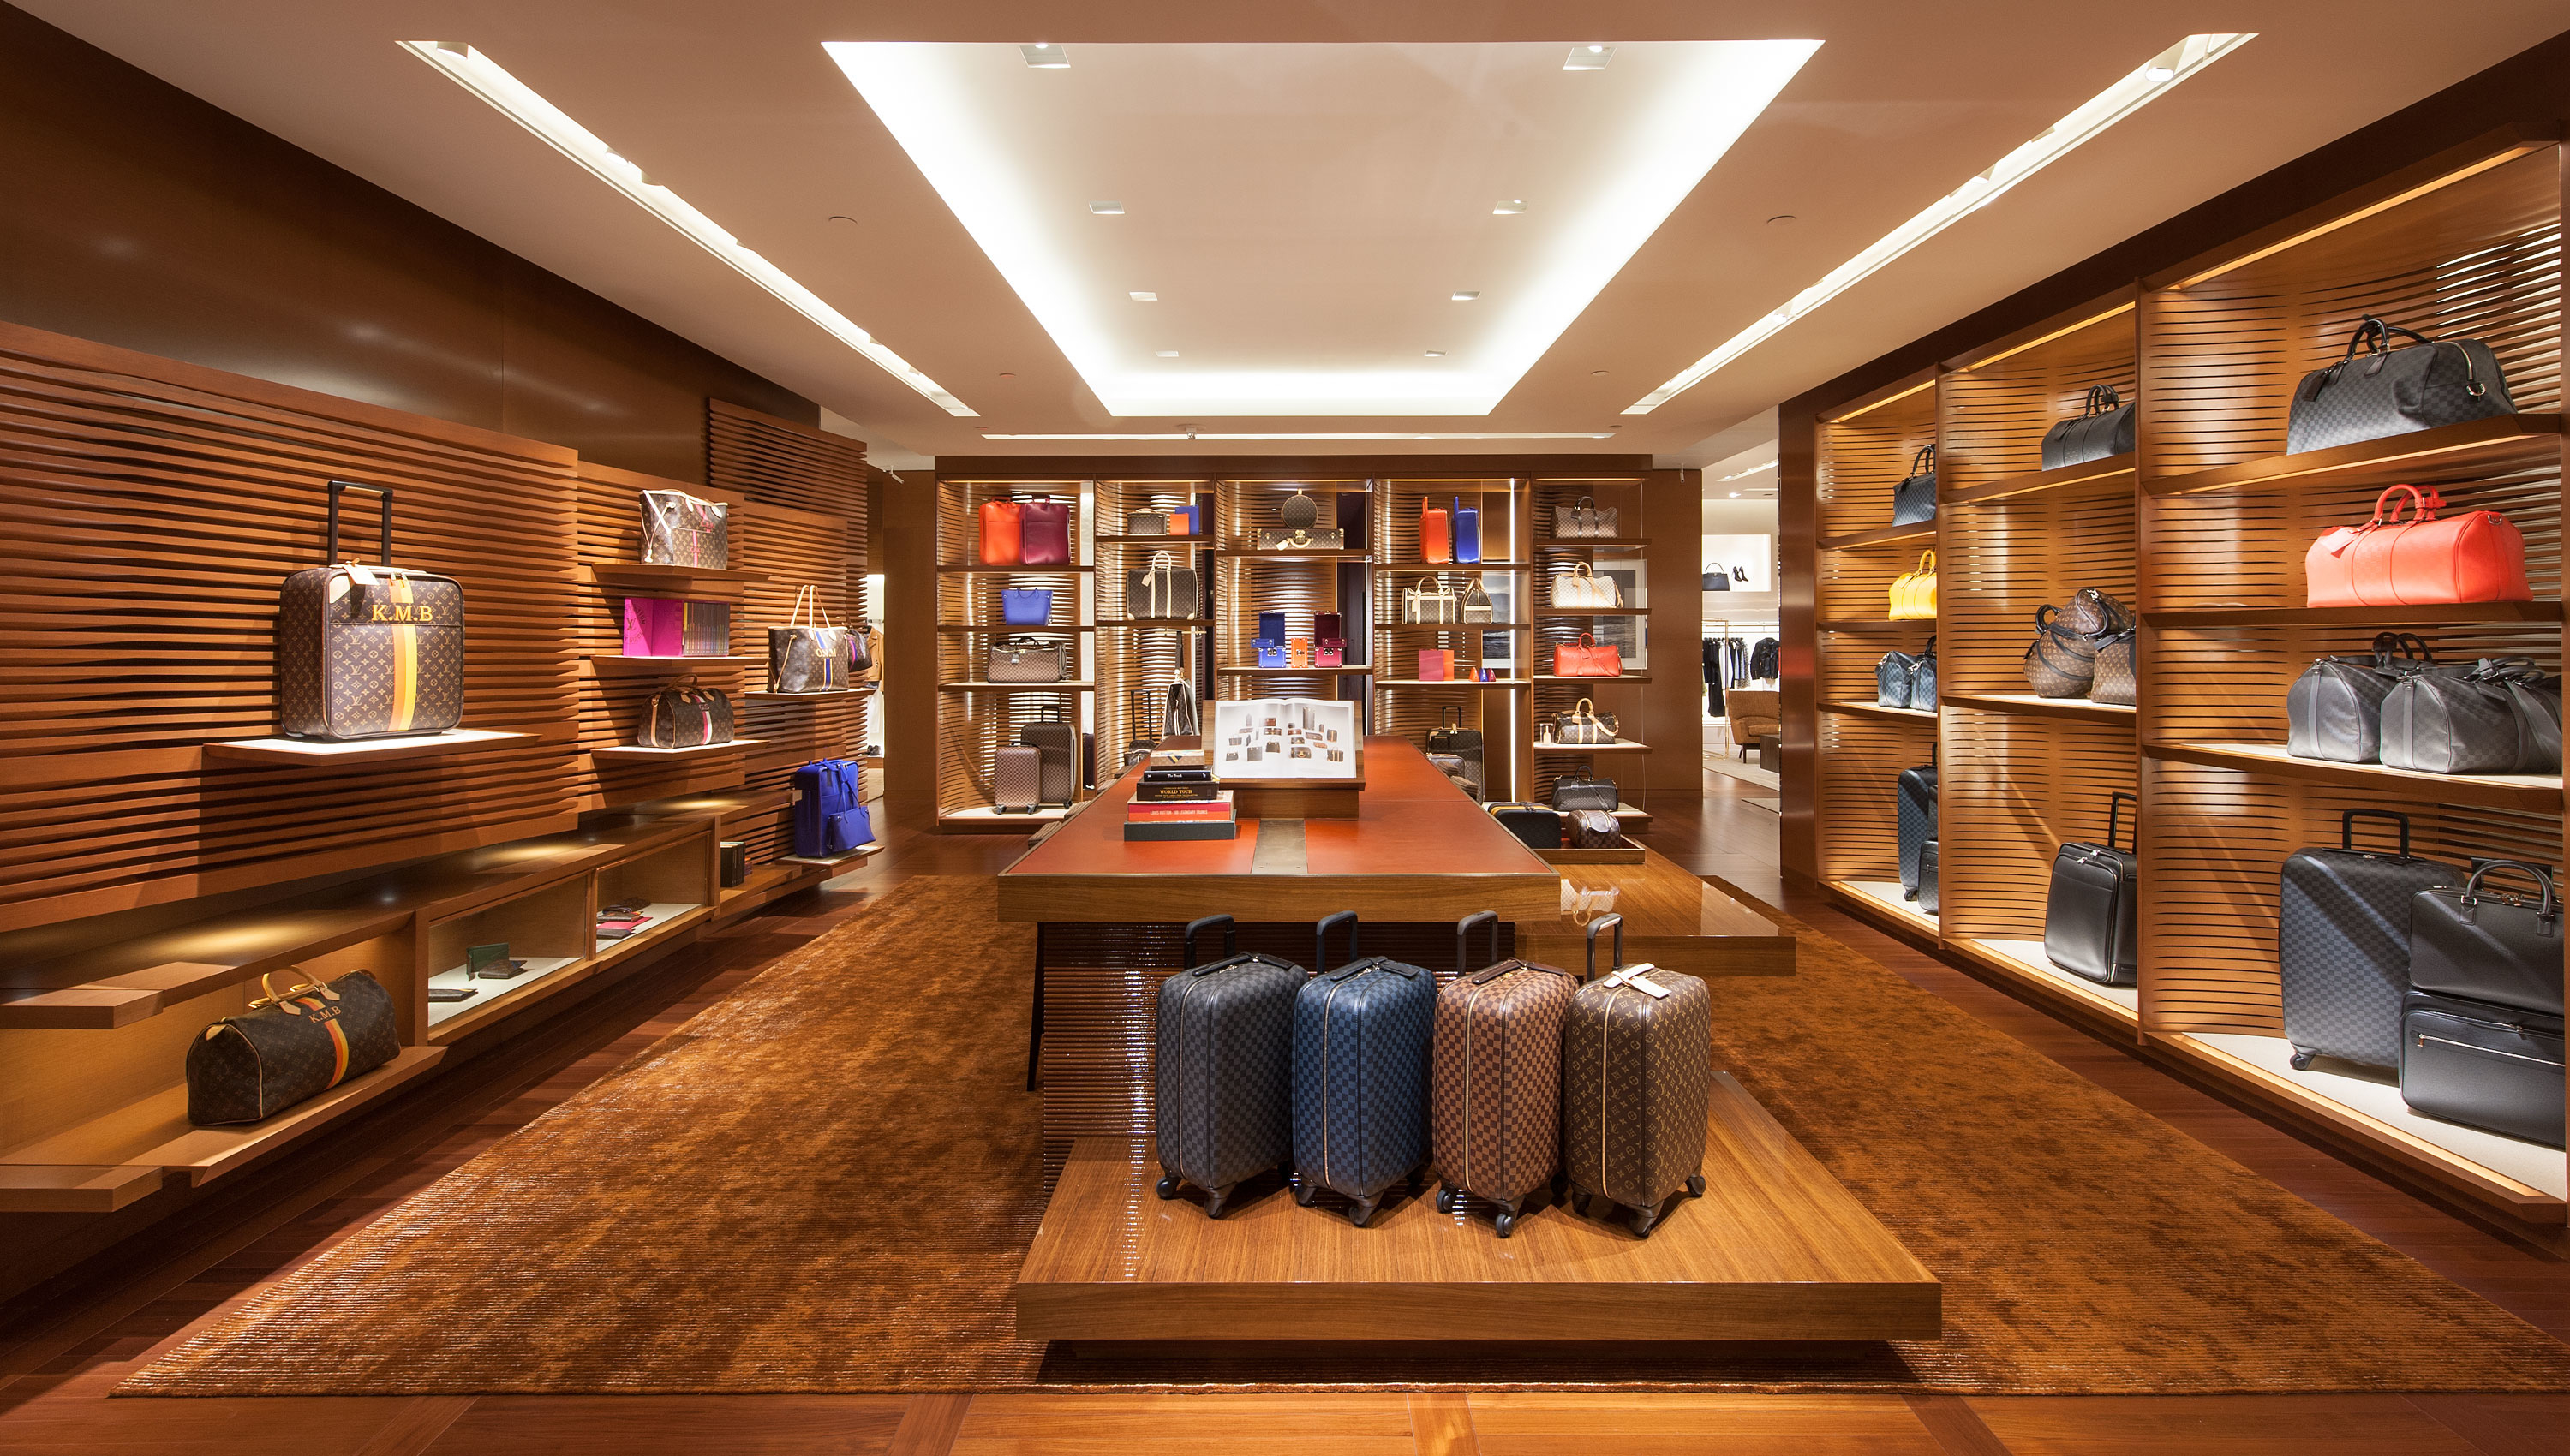 Louis Vuitton Hawaii Stores | Confederated Tribes of the Umatilla Indian Reservation